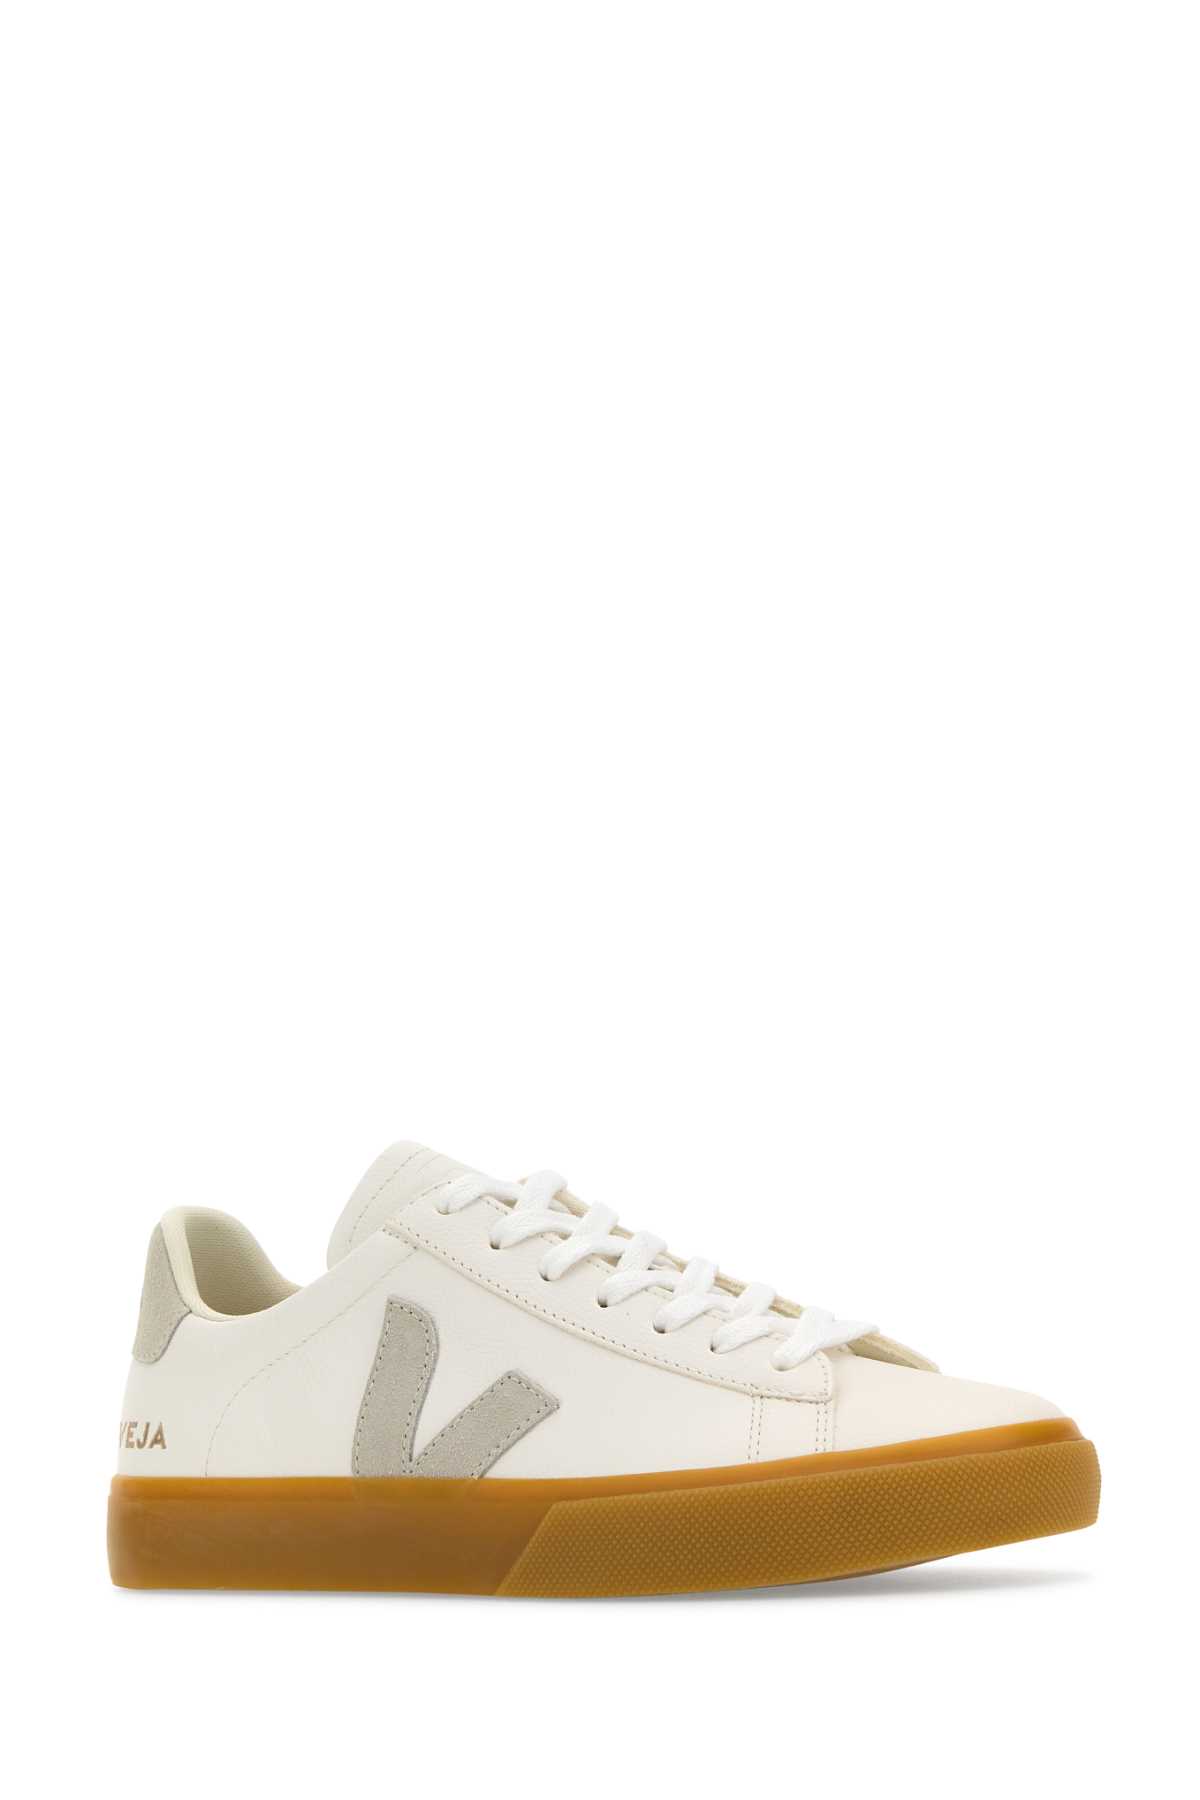 Veja White Leather Sneakers In Extrawhitenaturalnatural